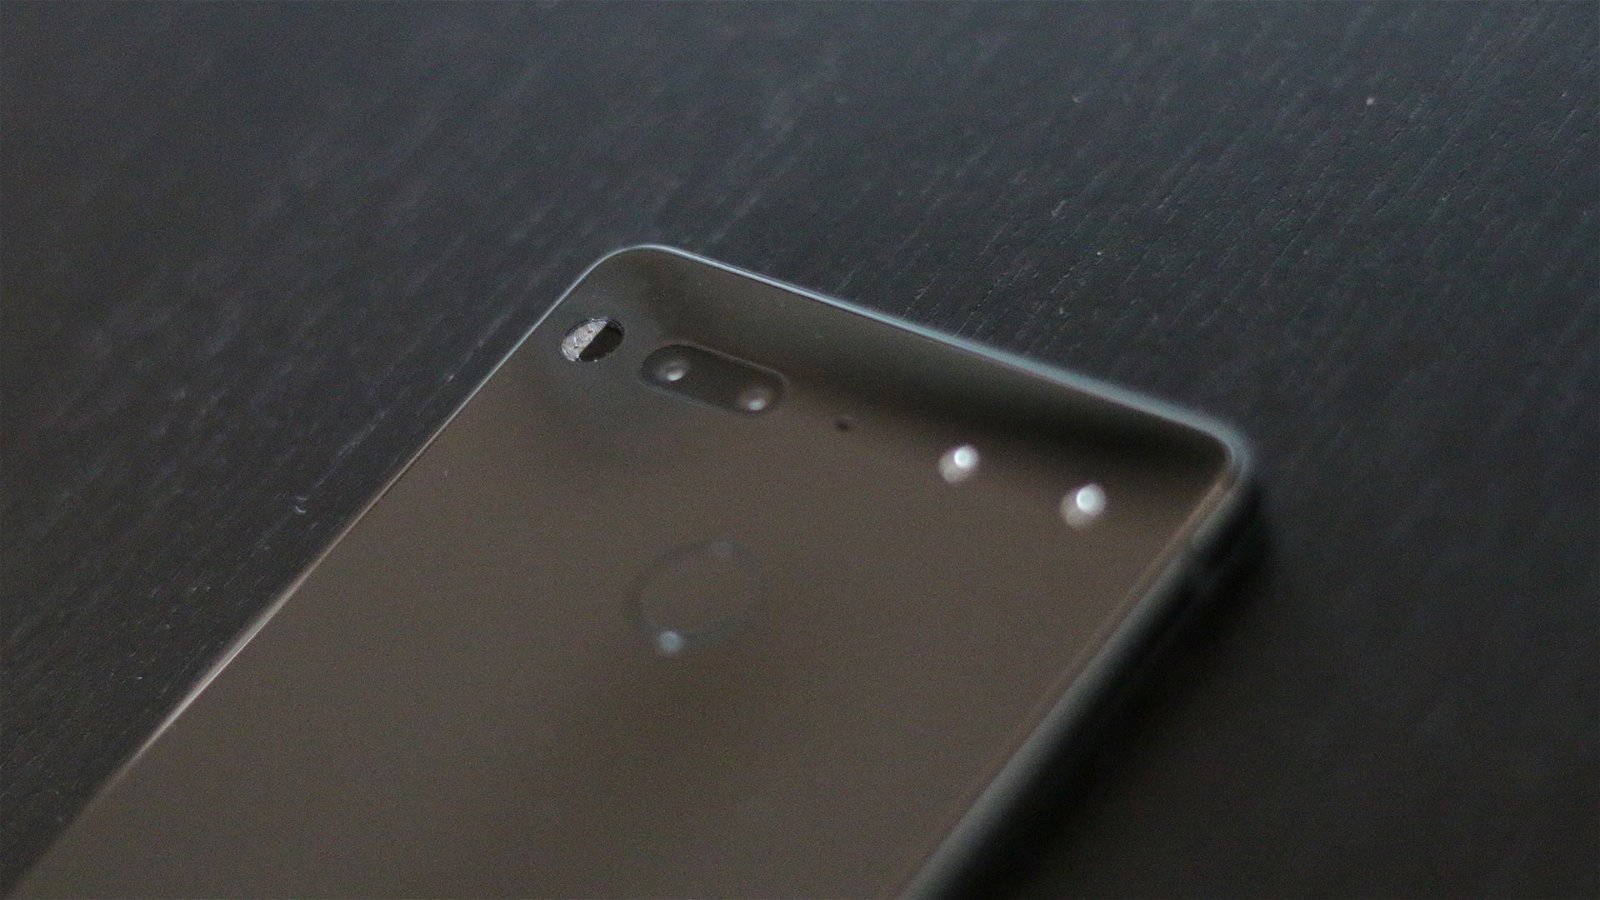 Essential Phone Review - Promising Start 4